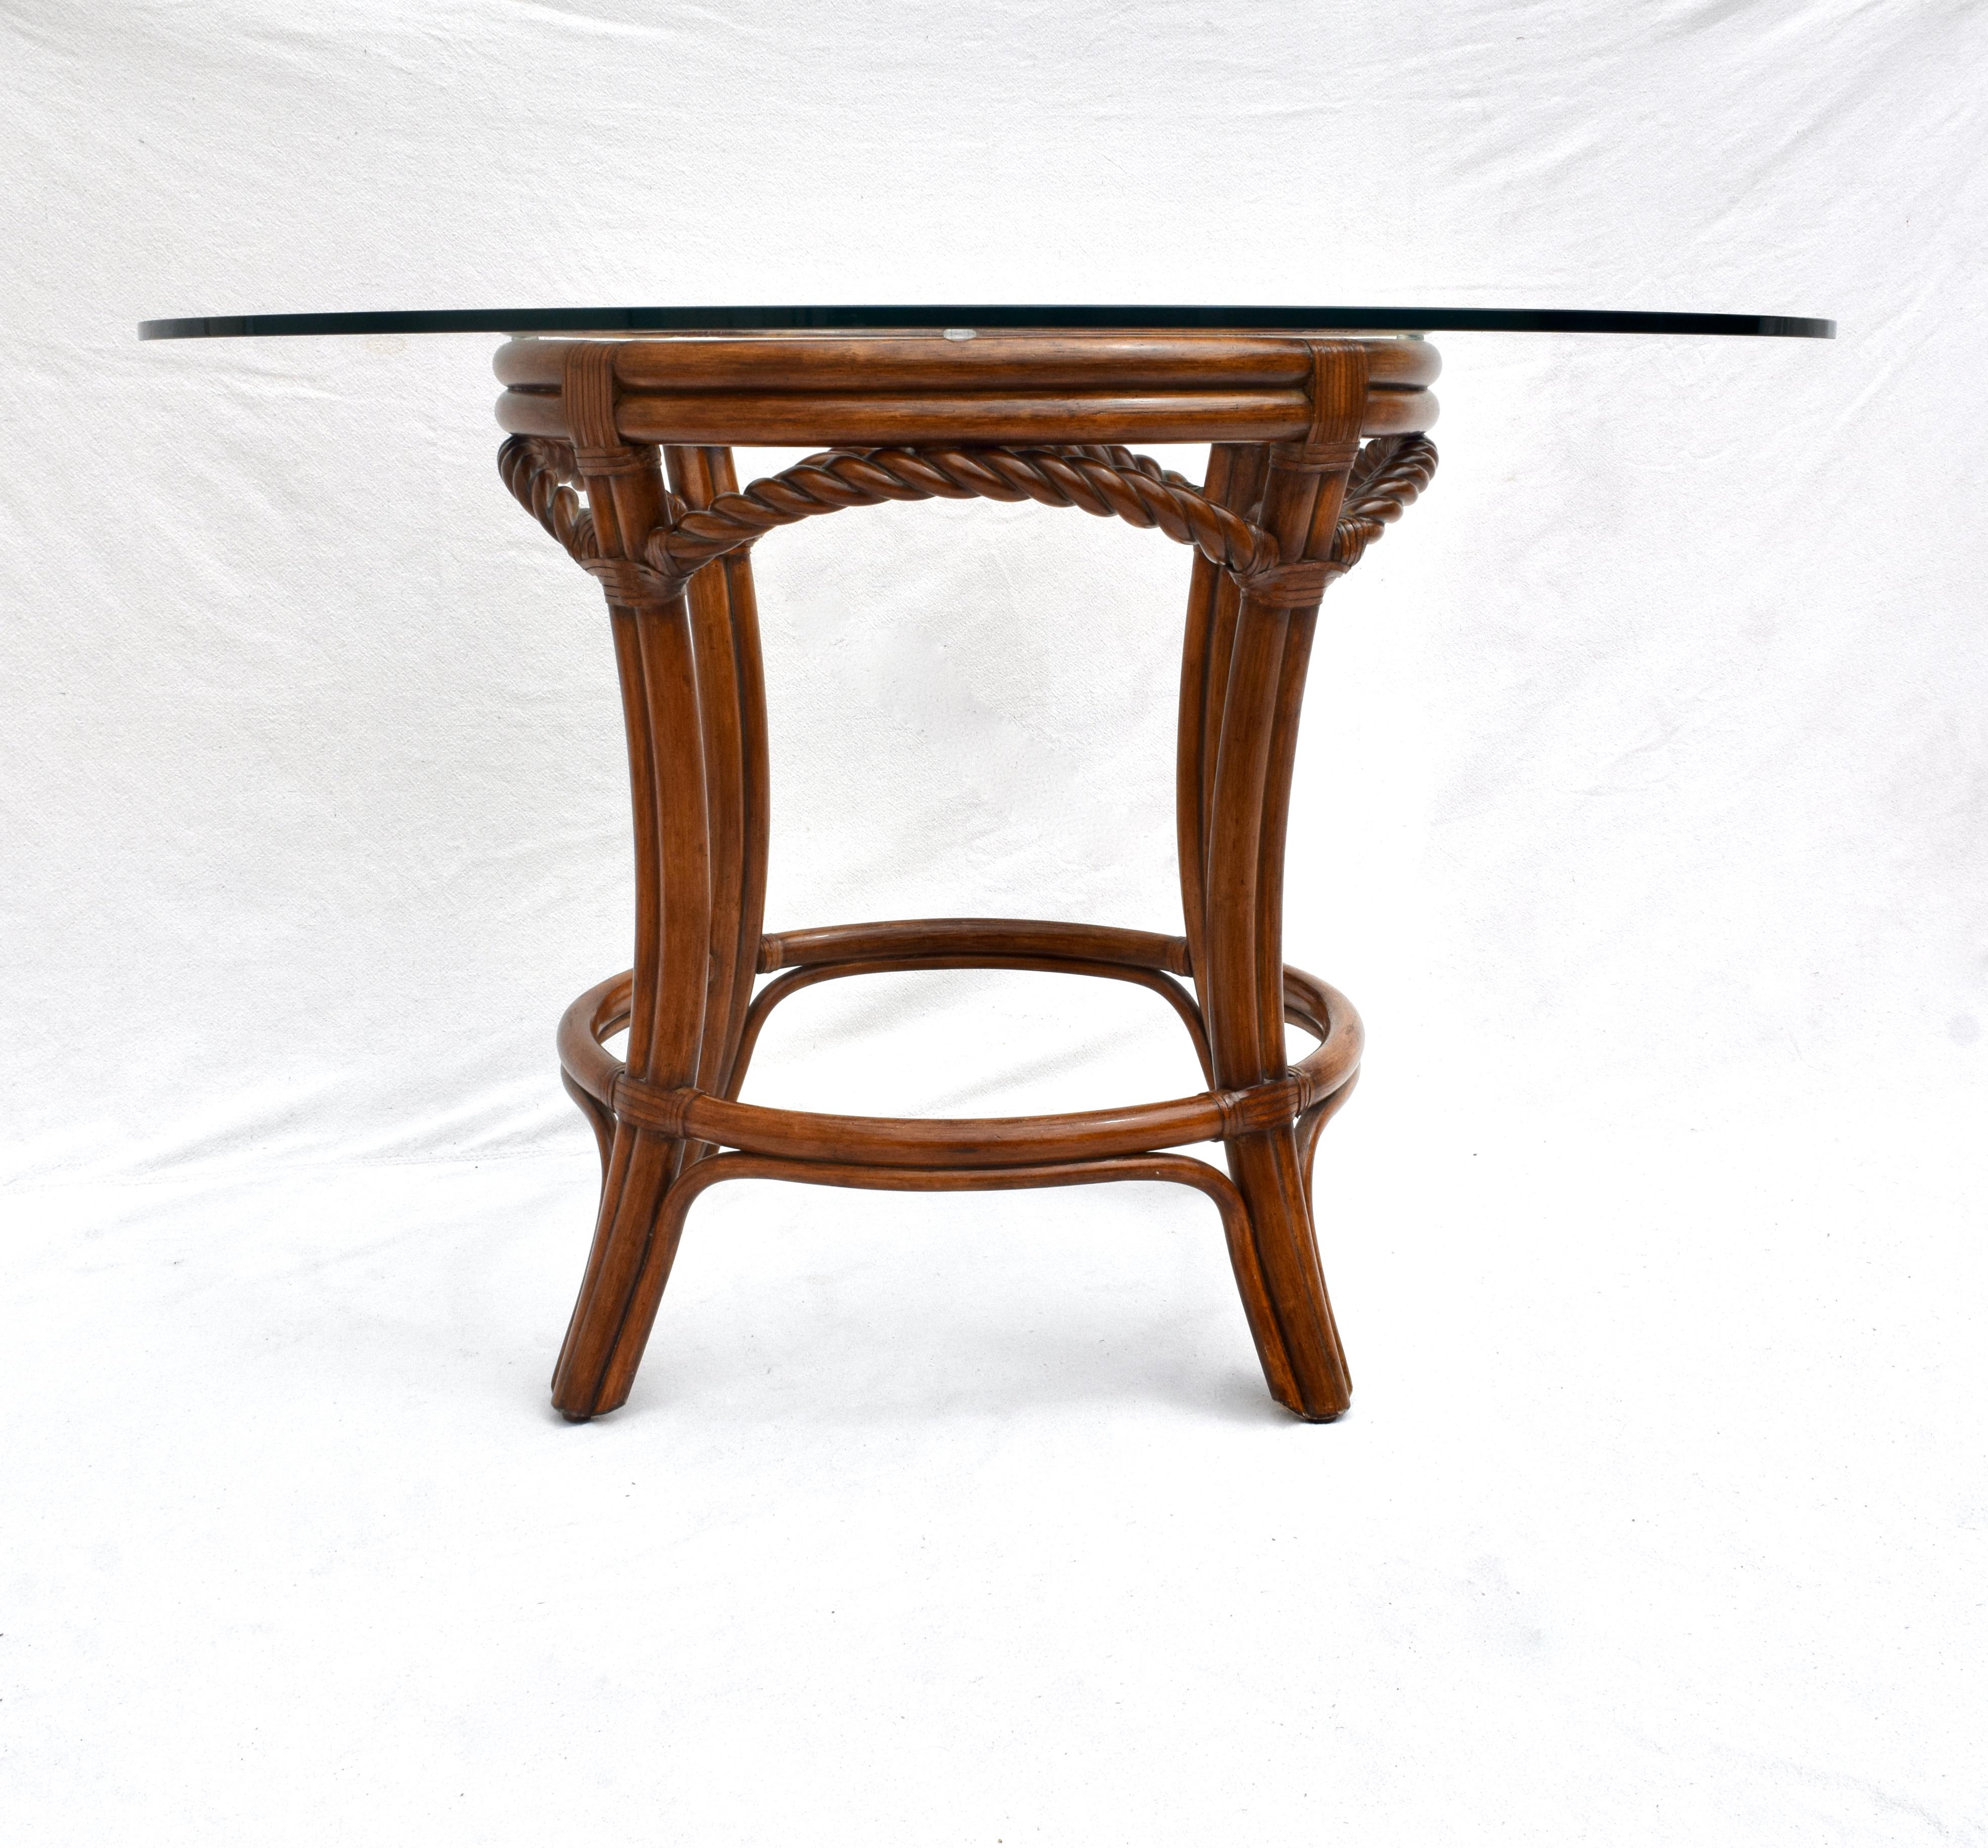 A fine Palecek French Regency style center or pedestal dining table of faux bamboo & braided rope styling accented with leather joinery in excellent vintage condition.  Table dimensions: 48